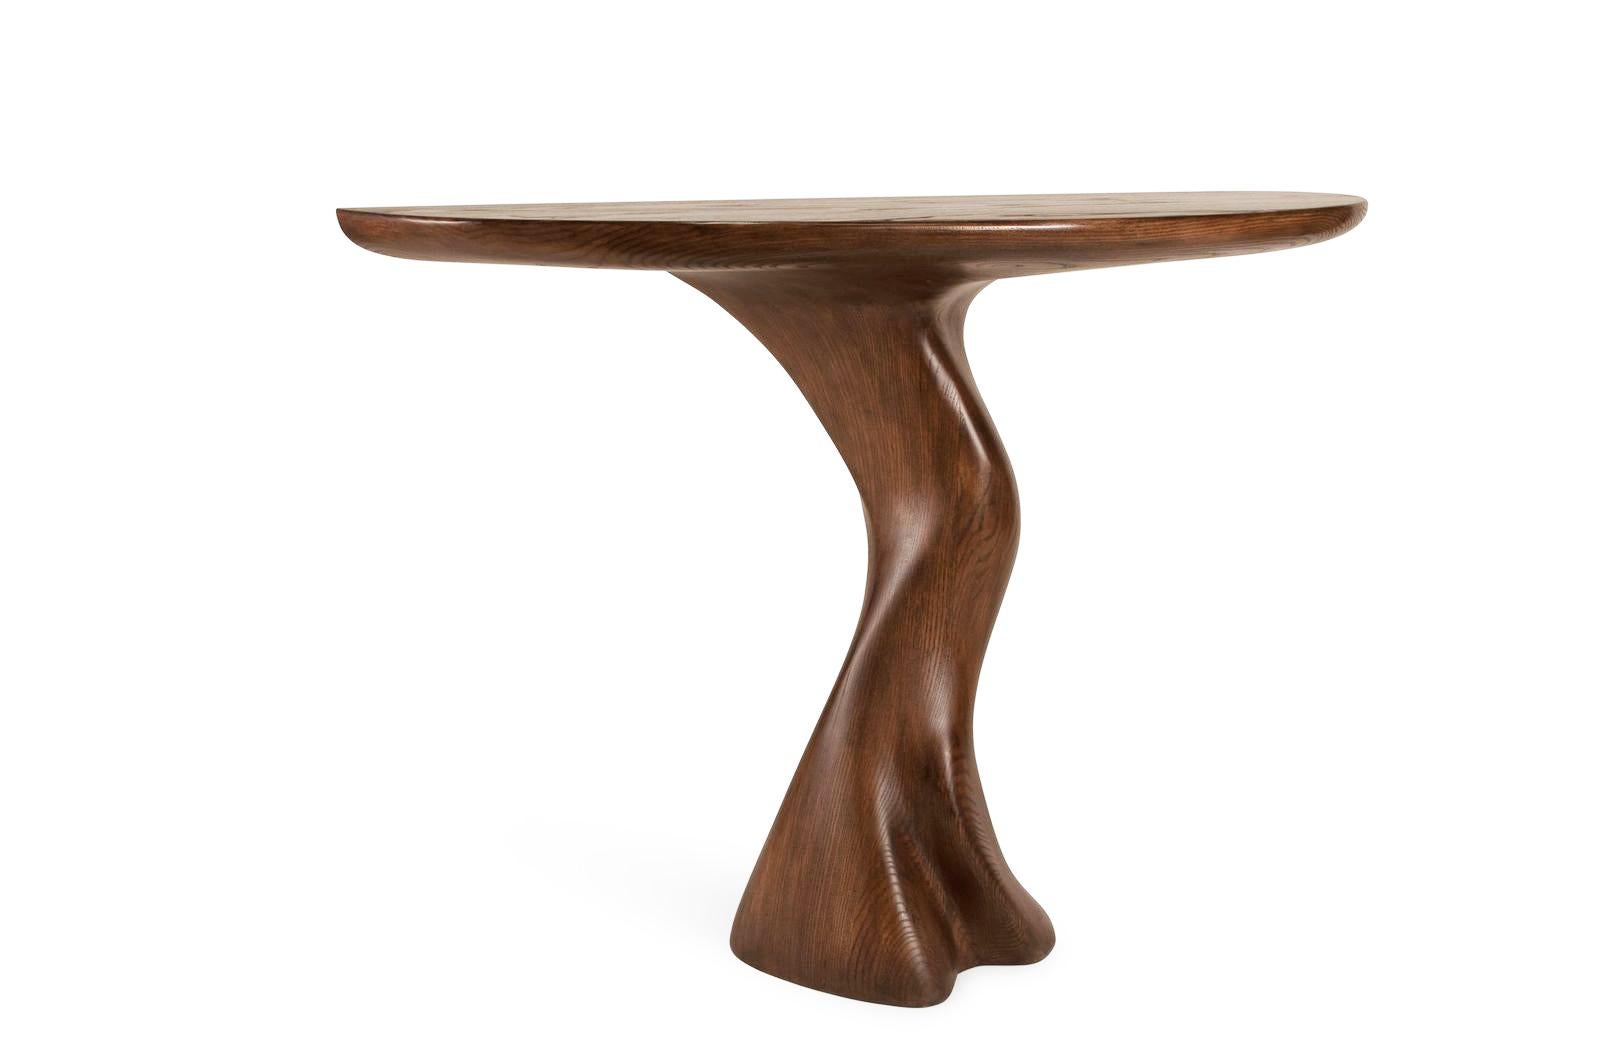 Haya console table is a stylish futuristic sculptural art table with a organic form designed and manufactured by Amorph. Haya console table is made out of solid wood and stained. 

It is available in different finishes and custom sizes. 

About